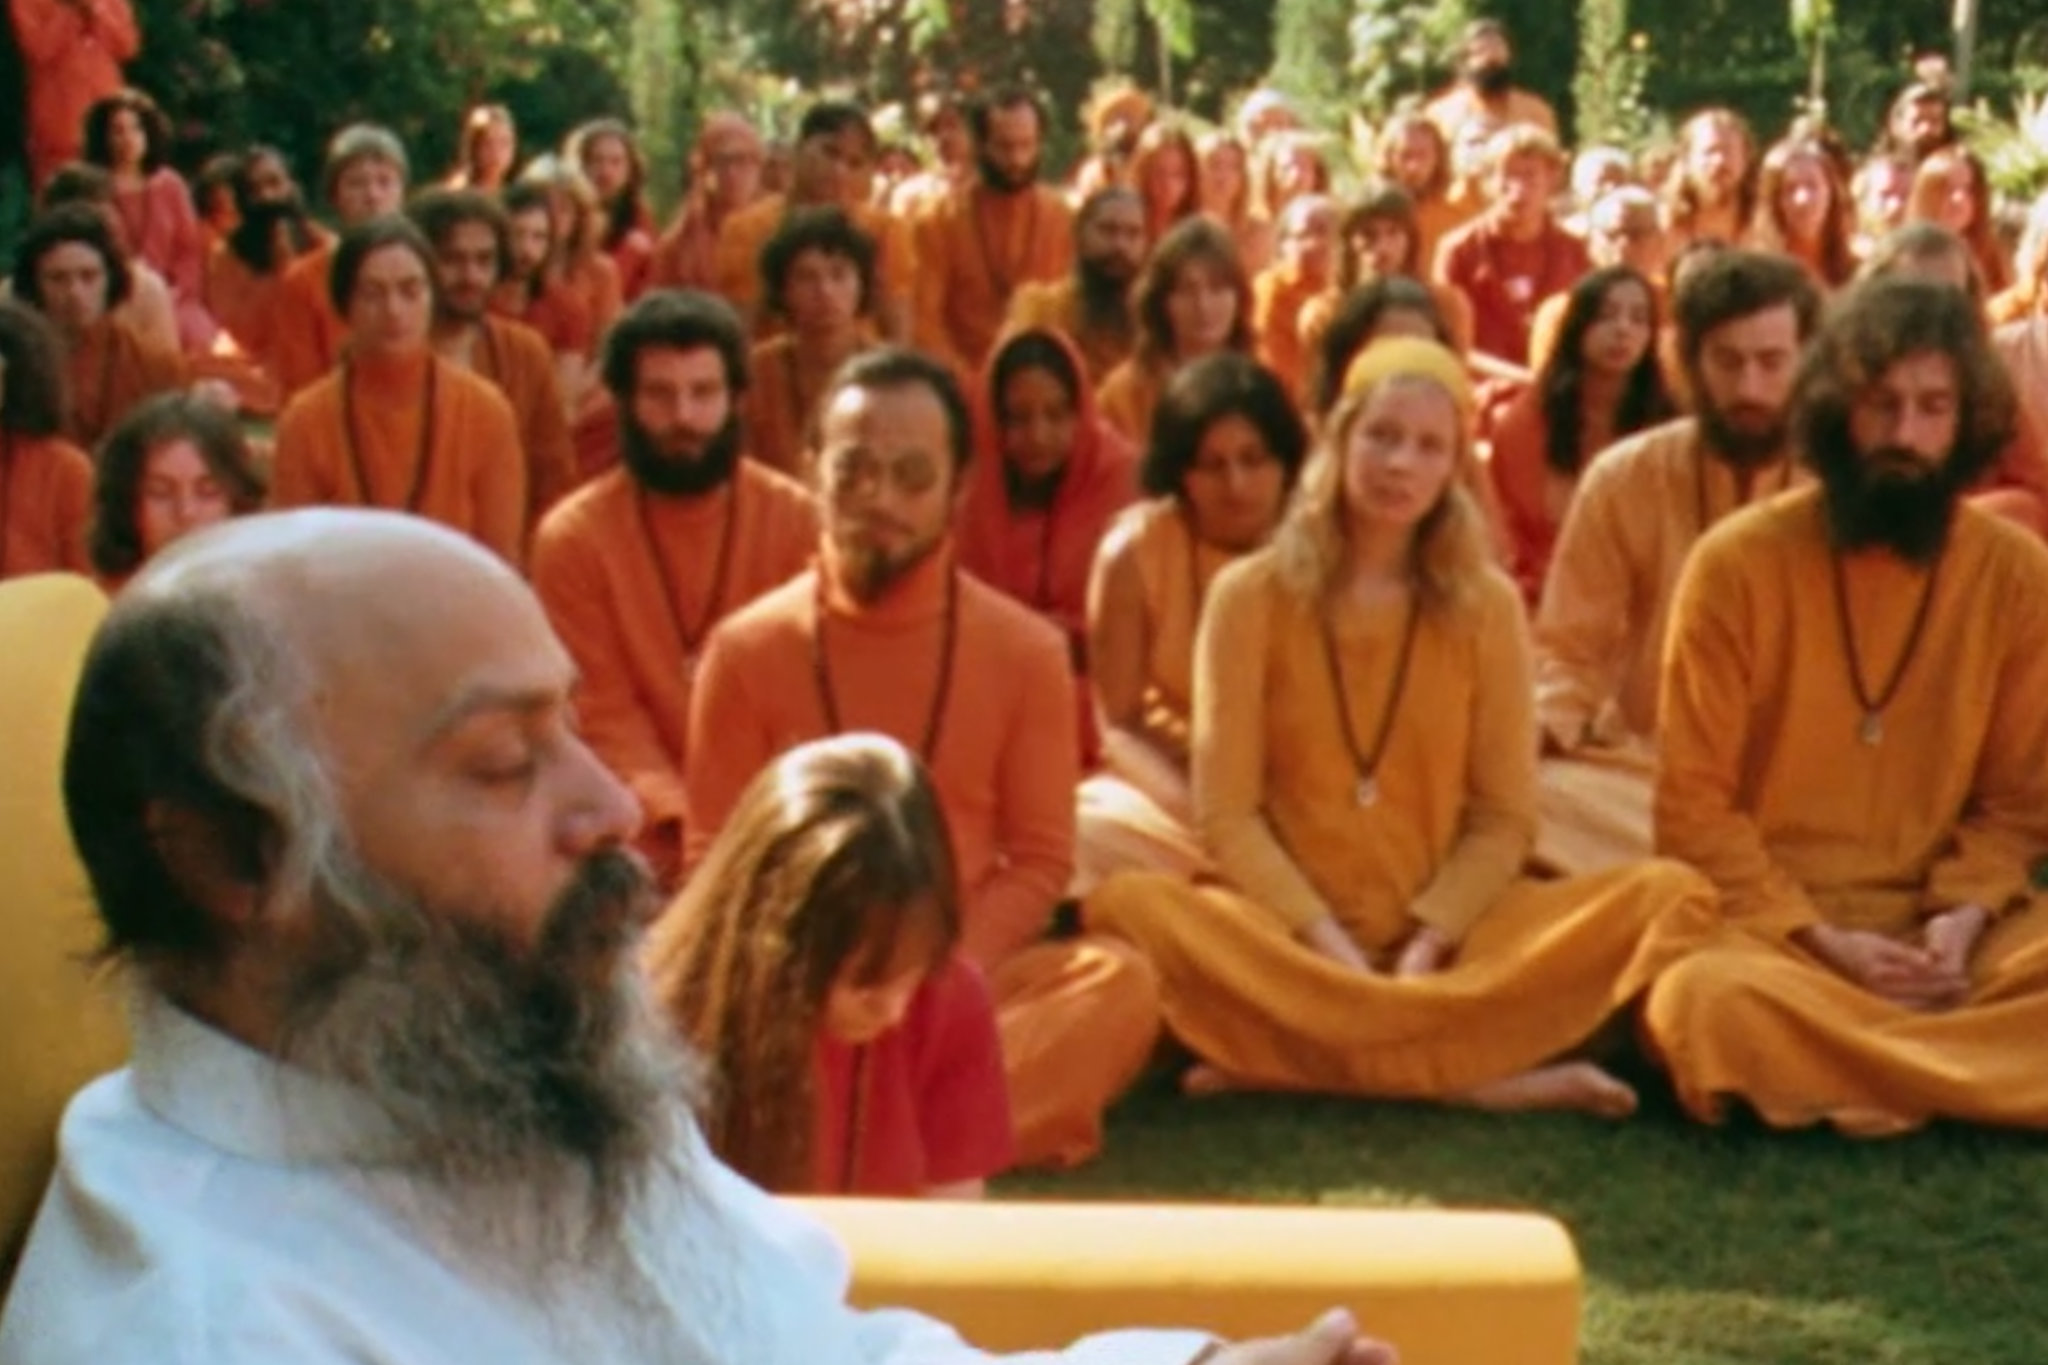 Wild wild country (2018) E reale Pannone